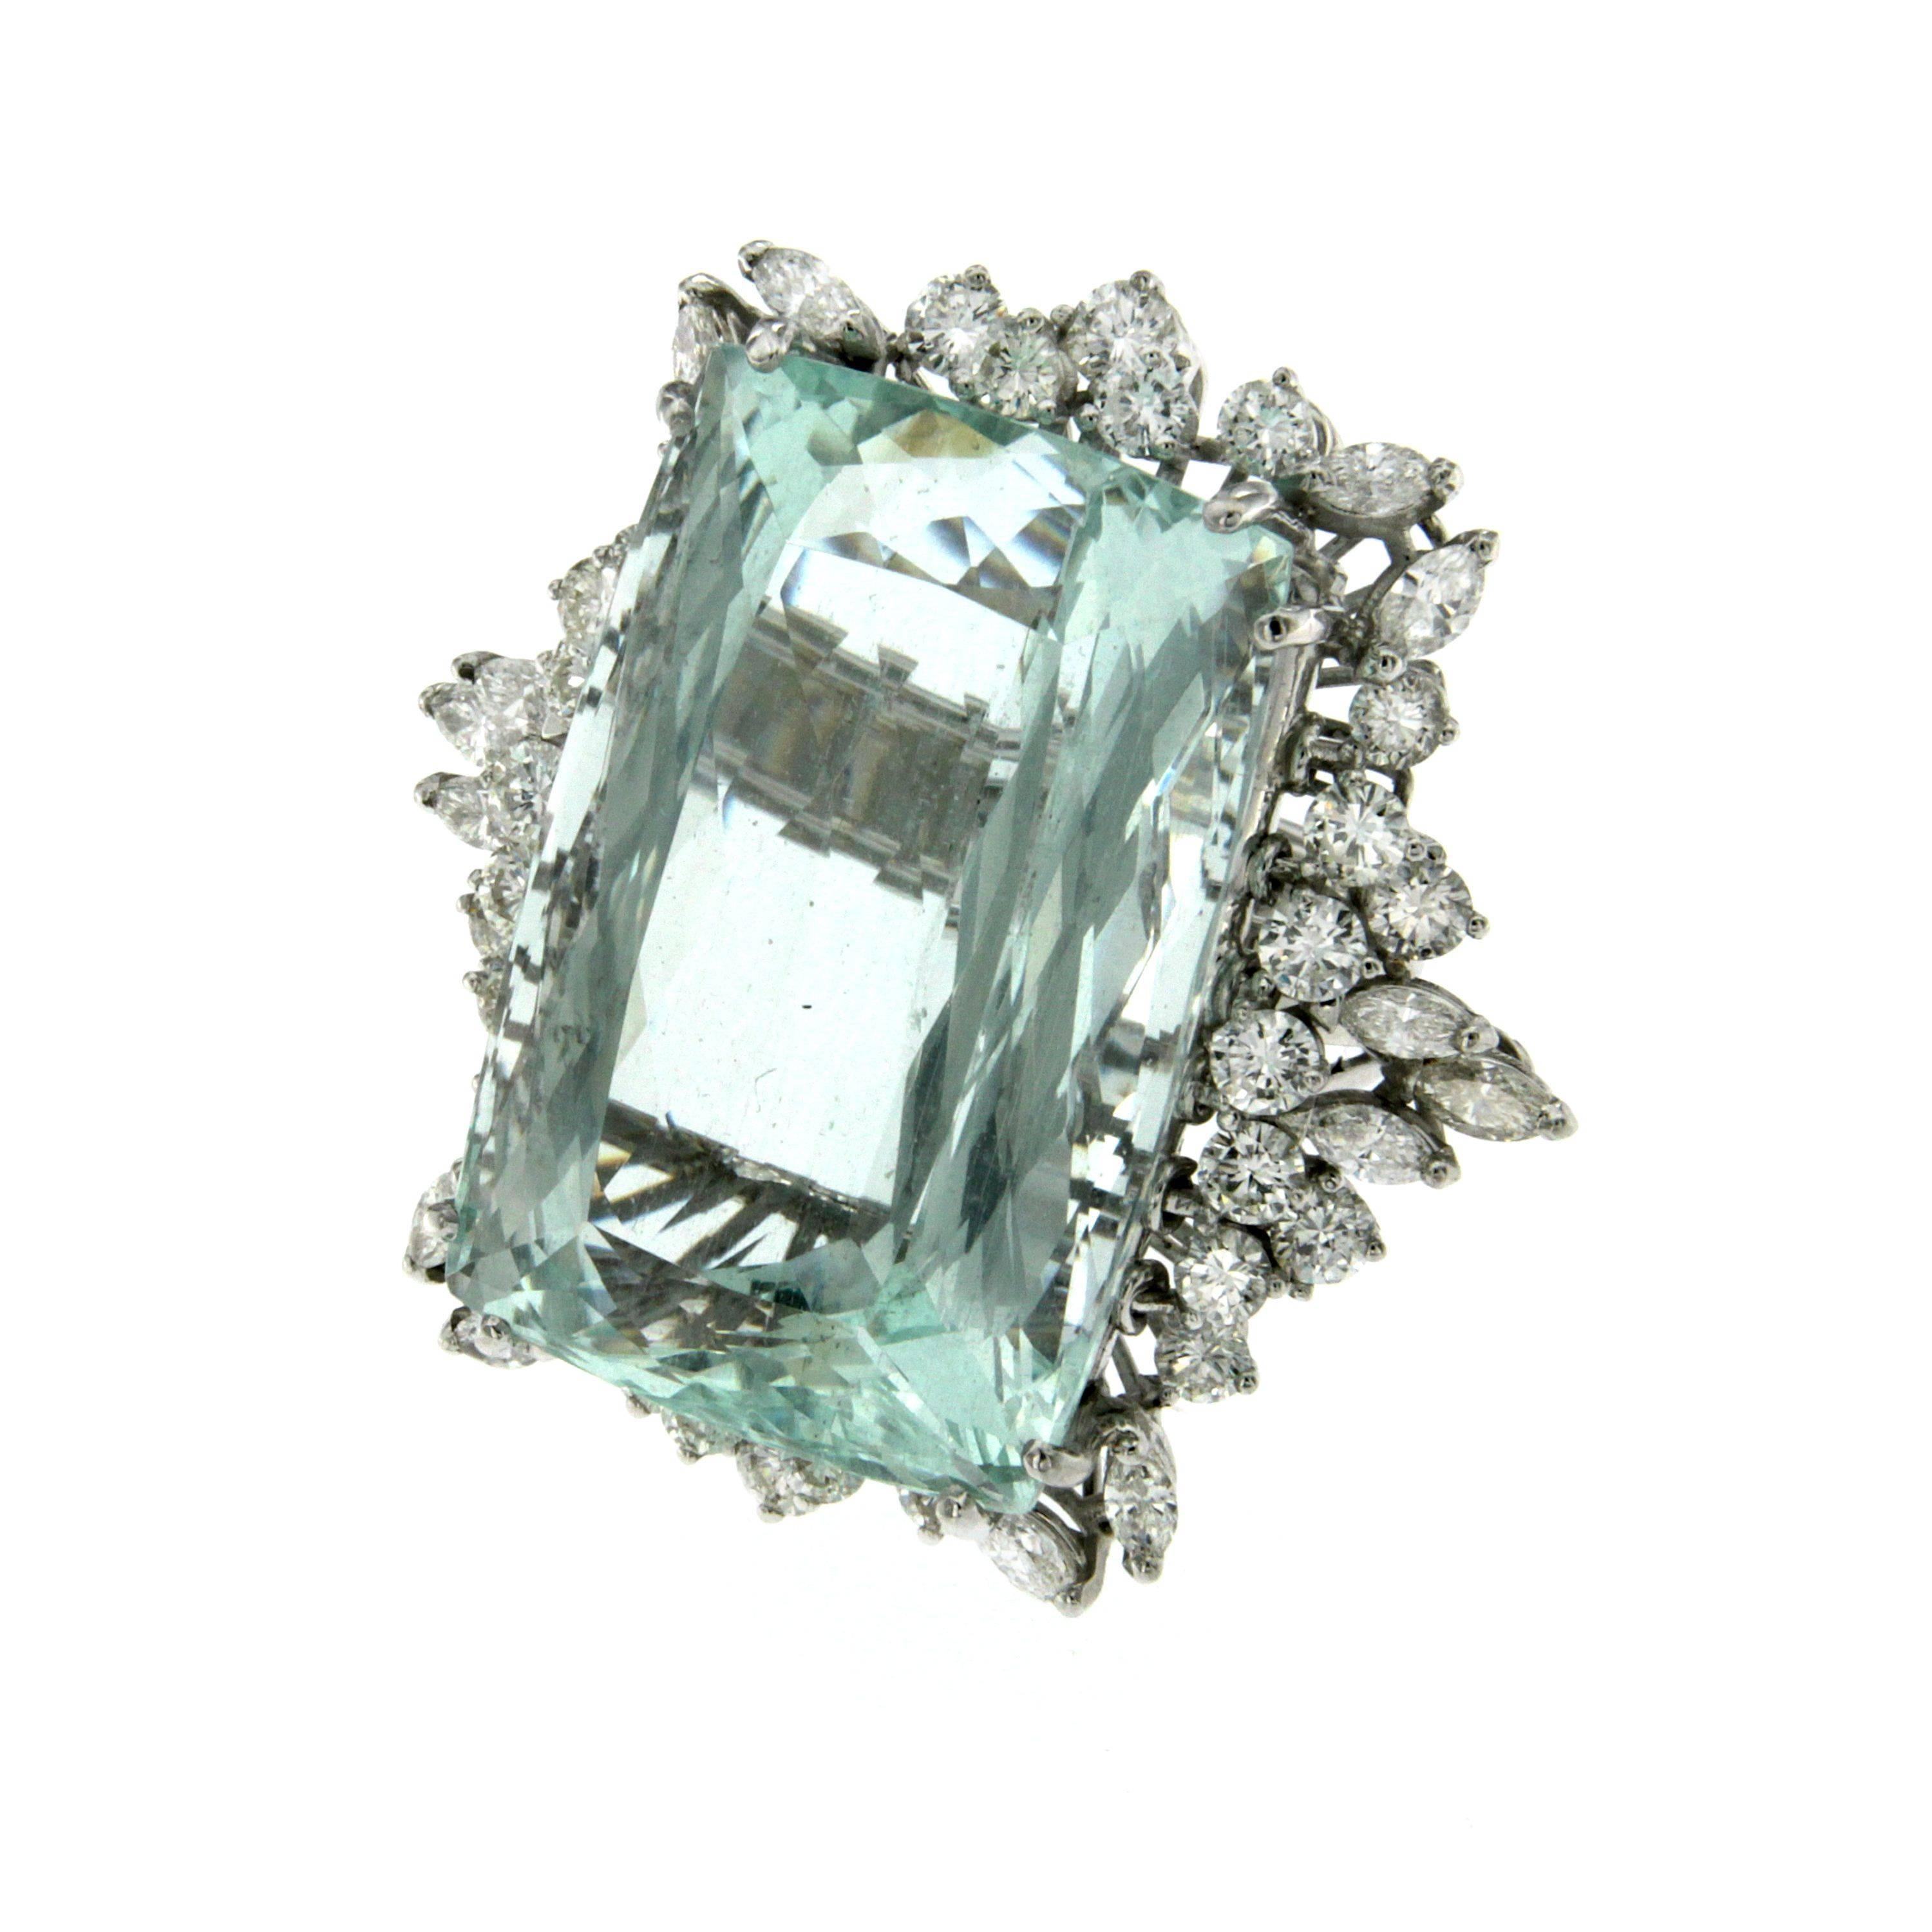 Unique acquamarine Ring mounted in 18k white gold and set in the middle with a rare and wide natural Aquamarine of 80 carat weight and surrounded by 3,50 carat of sparkling Diamonds round and navette cut graded G/H vvs2.

Ring measures: long 1,53